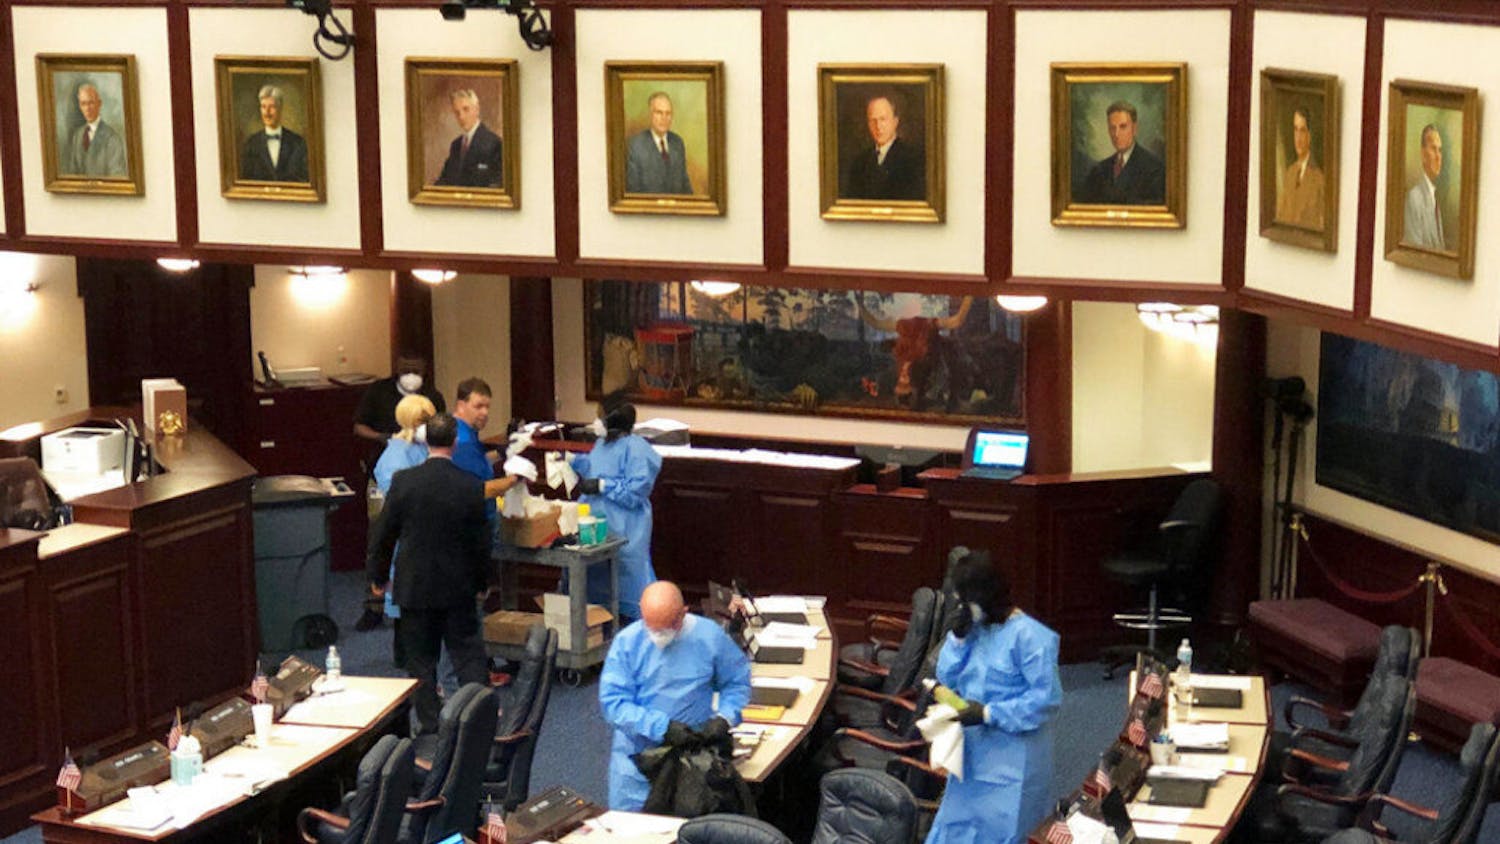 Crew members swab down Florida's House floor at the state Capitol in Tallahassee, Fla., Monday, March 9, 2020, after several members voluntarily submitted themselves for testing of a new strain of coronavirus. The Florida House abruptly recessed Monday afternoon and cleared public galleries after several of its members agreed to be tested for the new strain of coronavirus after recently attending a political event in Washington where one attendee tested positive for COVID-19. (AP Photo/Bobby Caina Calvan)